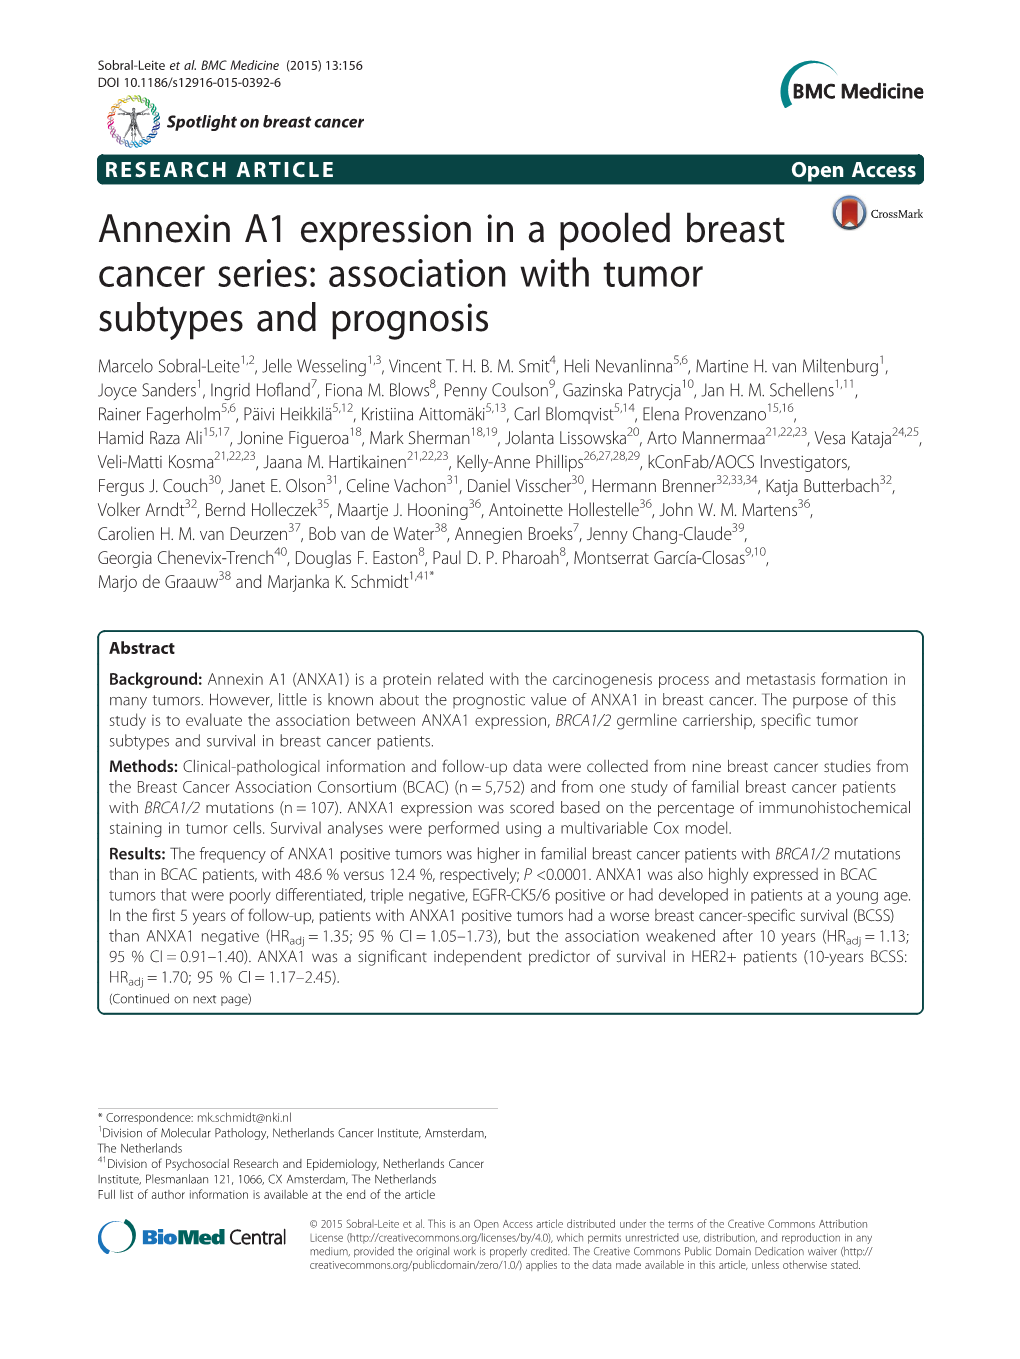 Annexin A1 Expression in a Pooled Breast Cancer Series: Association with Tumor Subtypes and Prognosis Marcelo Sobral-Leite1,2, Jelle Wesseling1,3, Vincent T